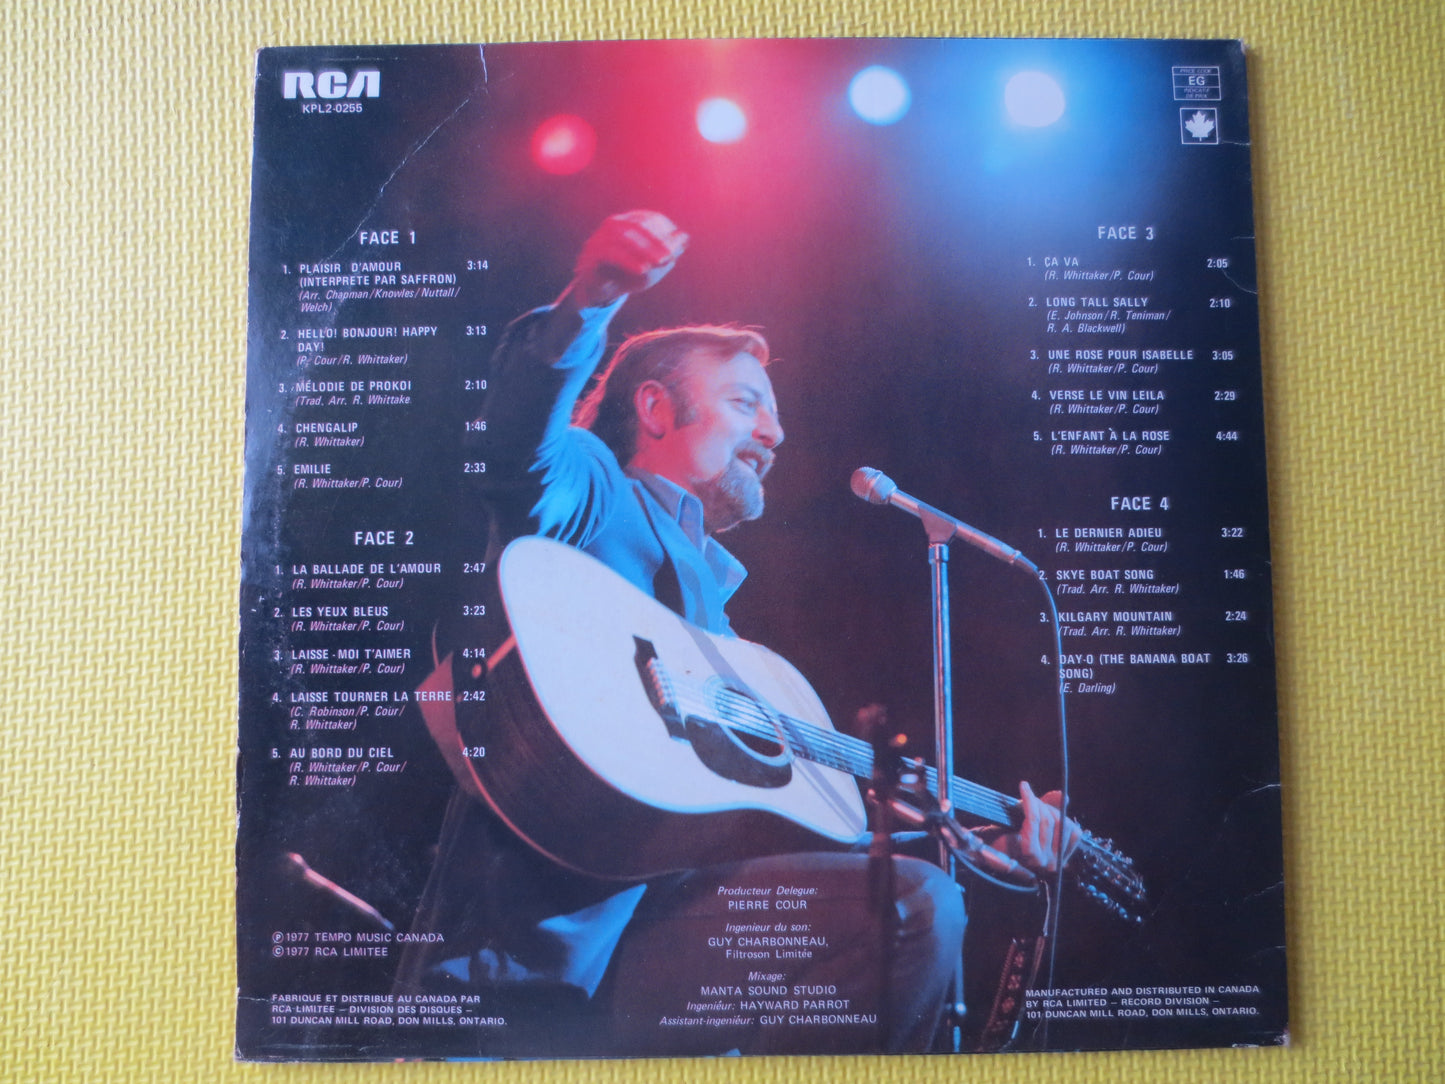 ROGER WHITTAKER, FRENCH, En SPECTACLE, 2 Records, Roger WHITTAKER Lp, Vintage Vinyl, Record Vinyl, Vinyl Record, Country Lps, 1977 Records